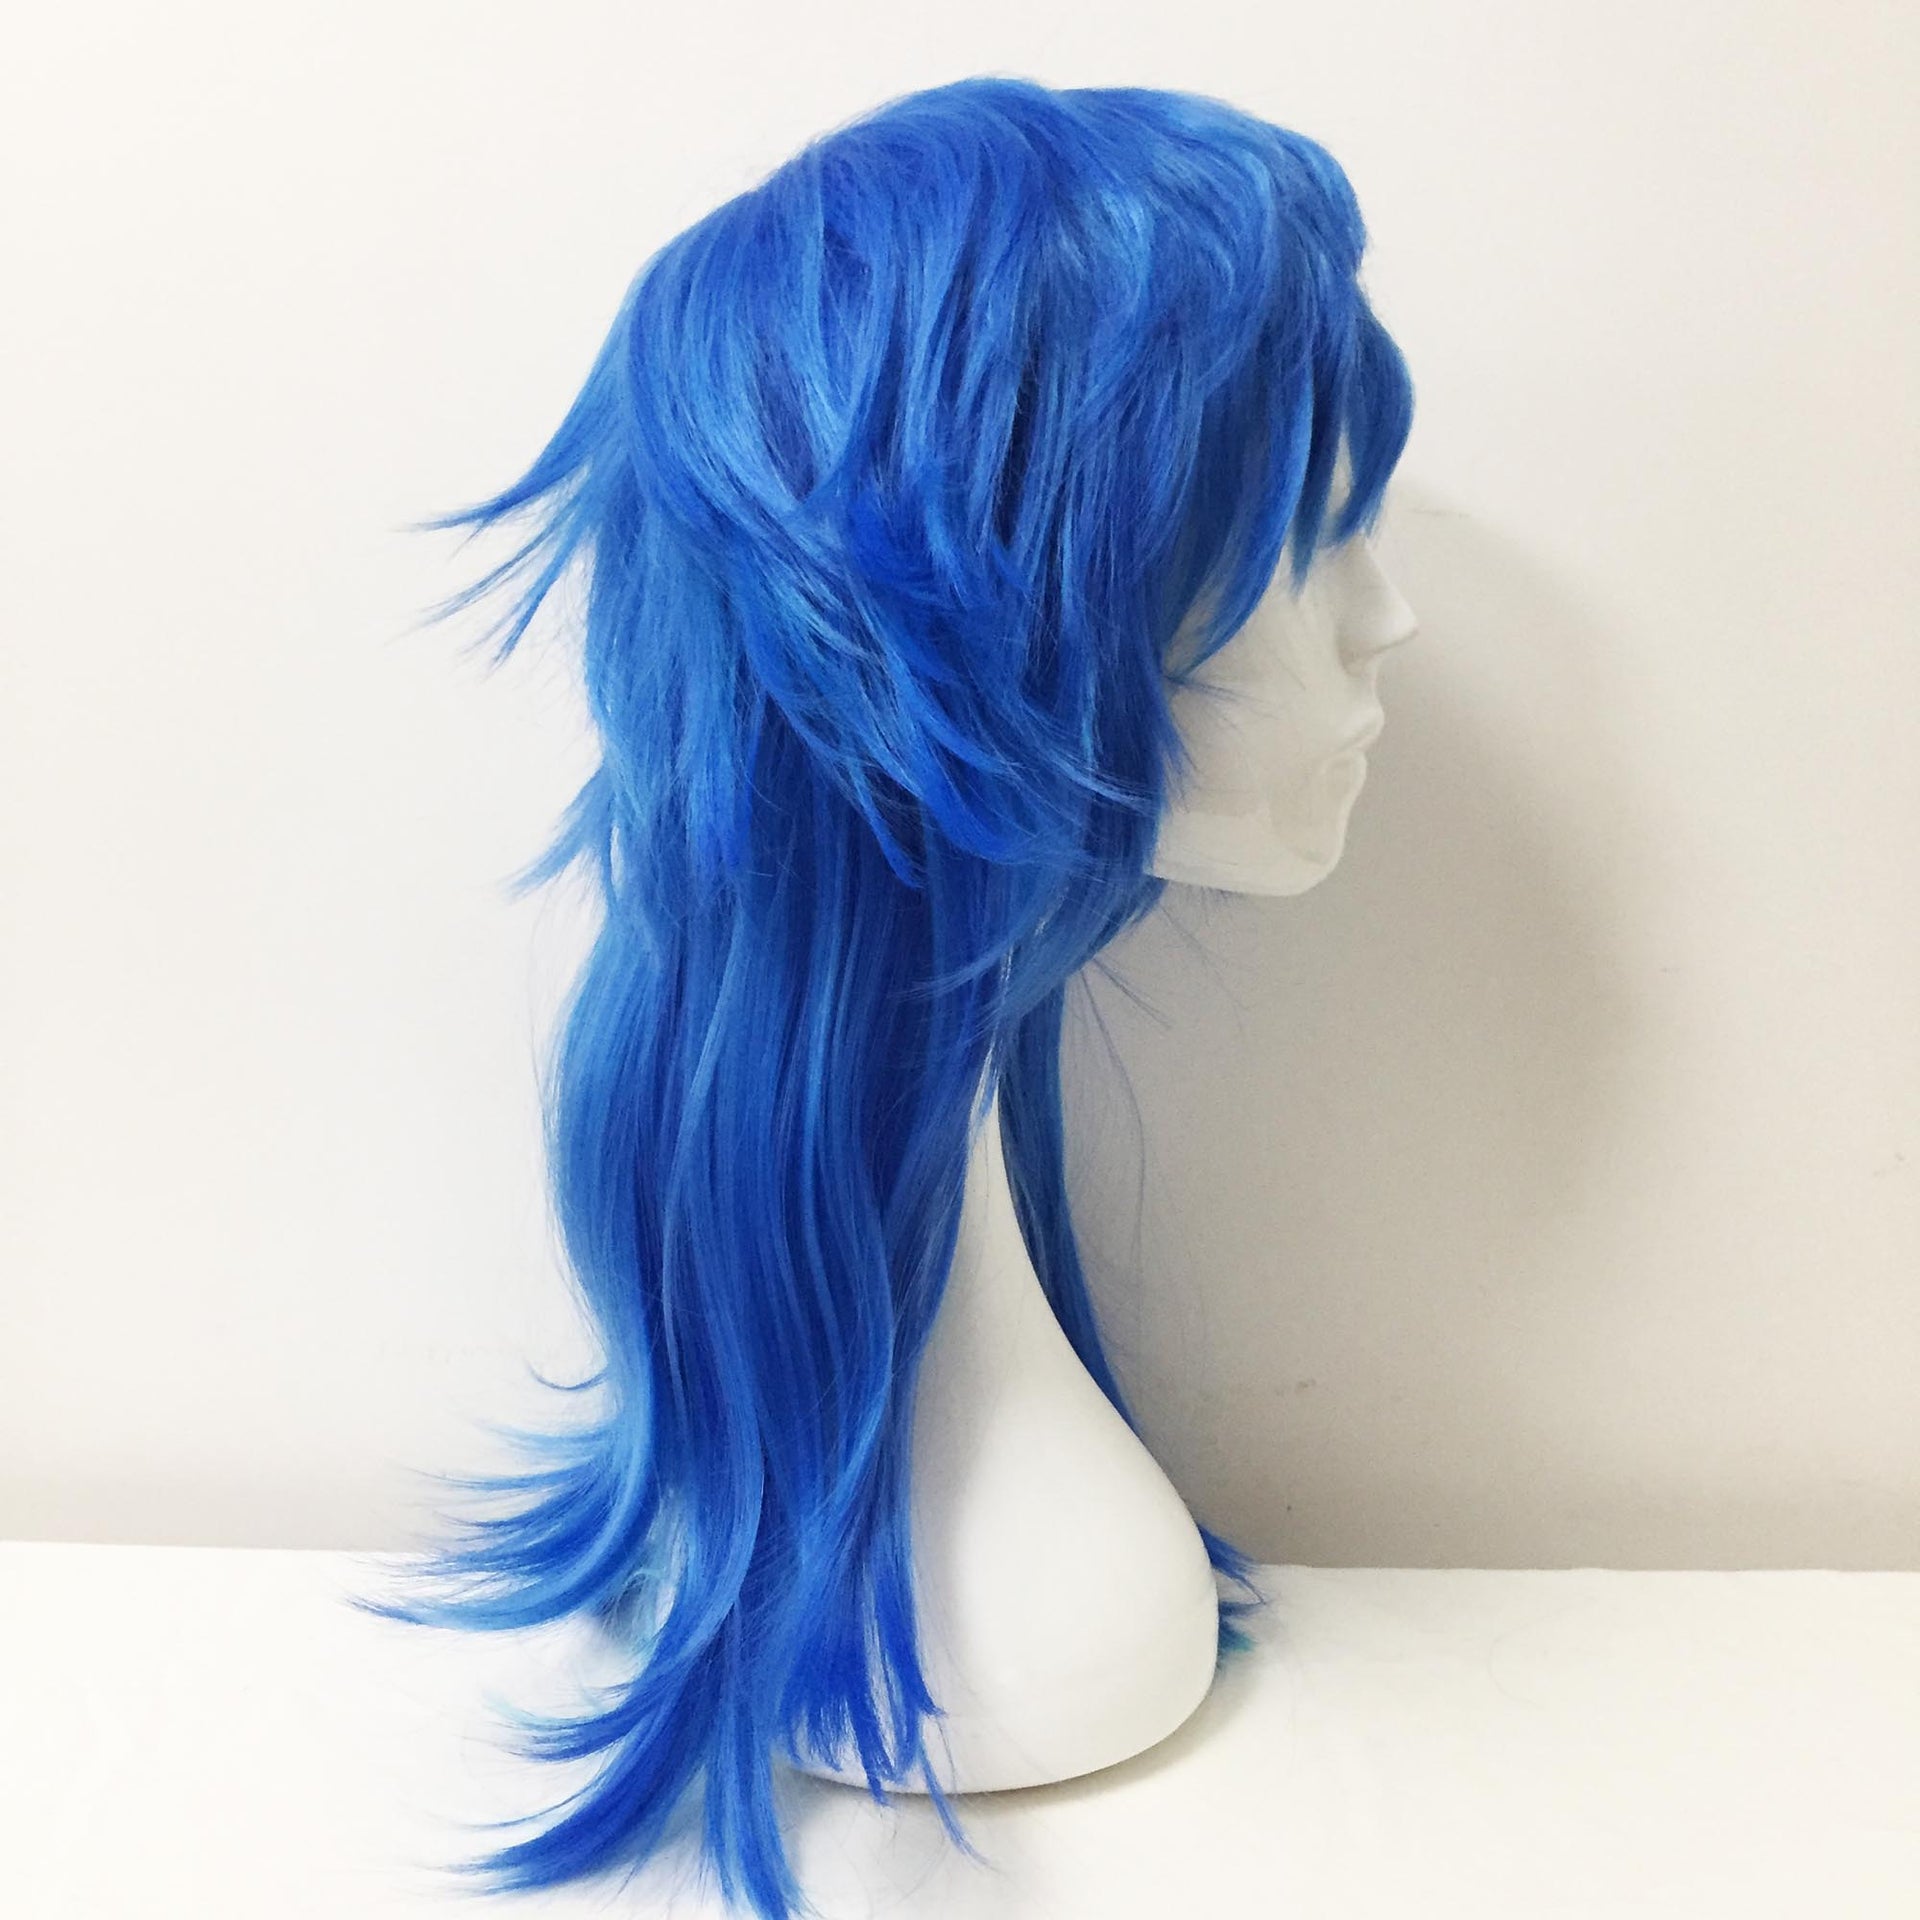 nevermindyrhead Men Blue Two-Tone Long Straight Layered Fringe Bangs Mullet Cosplay Wig